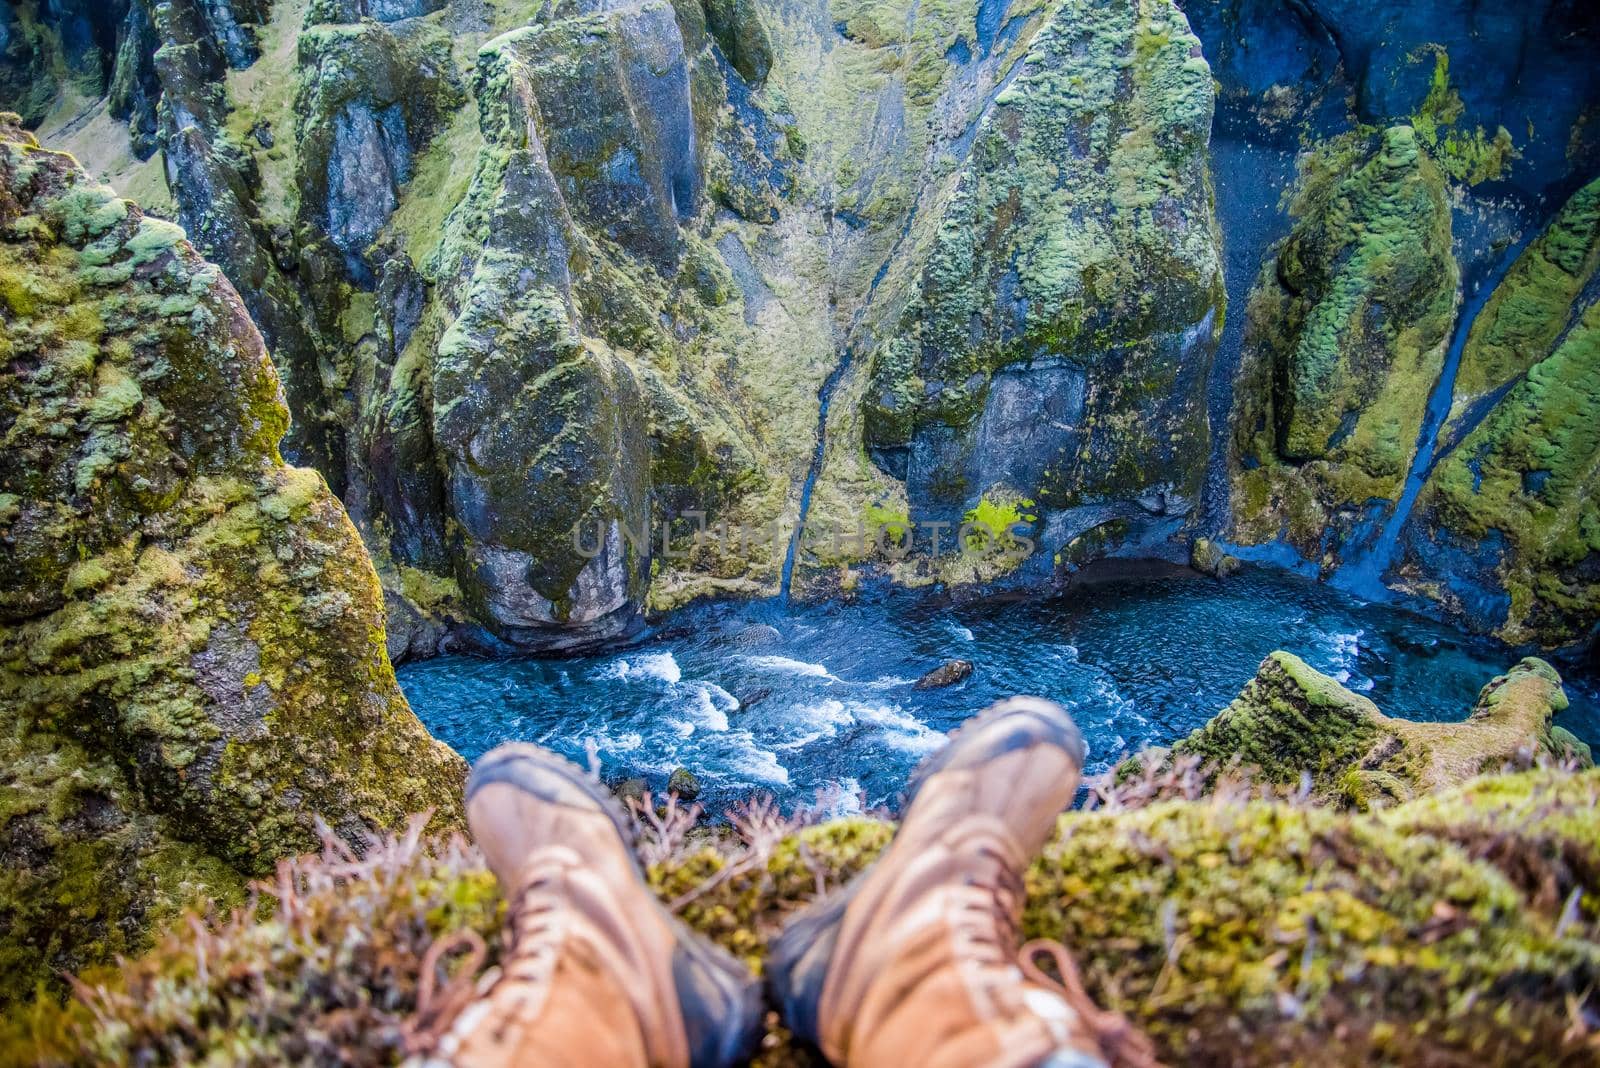 Iceland mossy green canyon with breathtaking views. View of hikers feet with boots on overlooking the river flowing through the canyon. by jyurinko